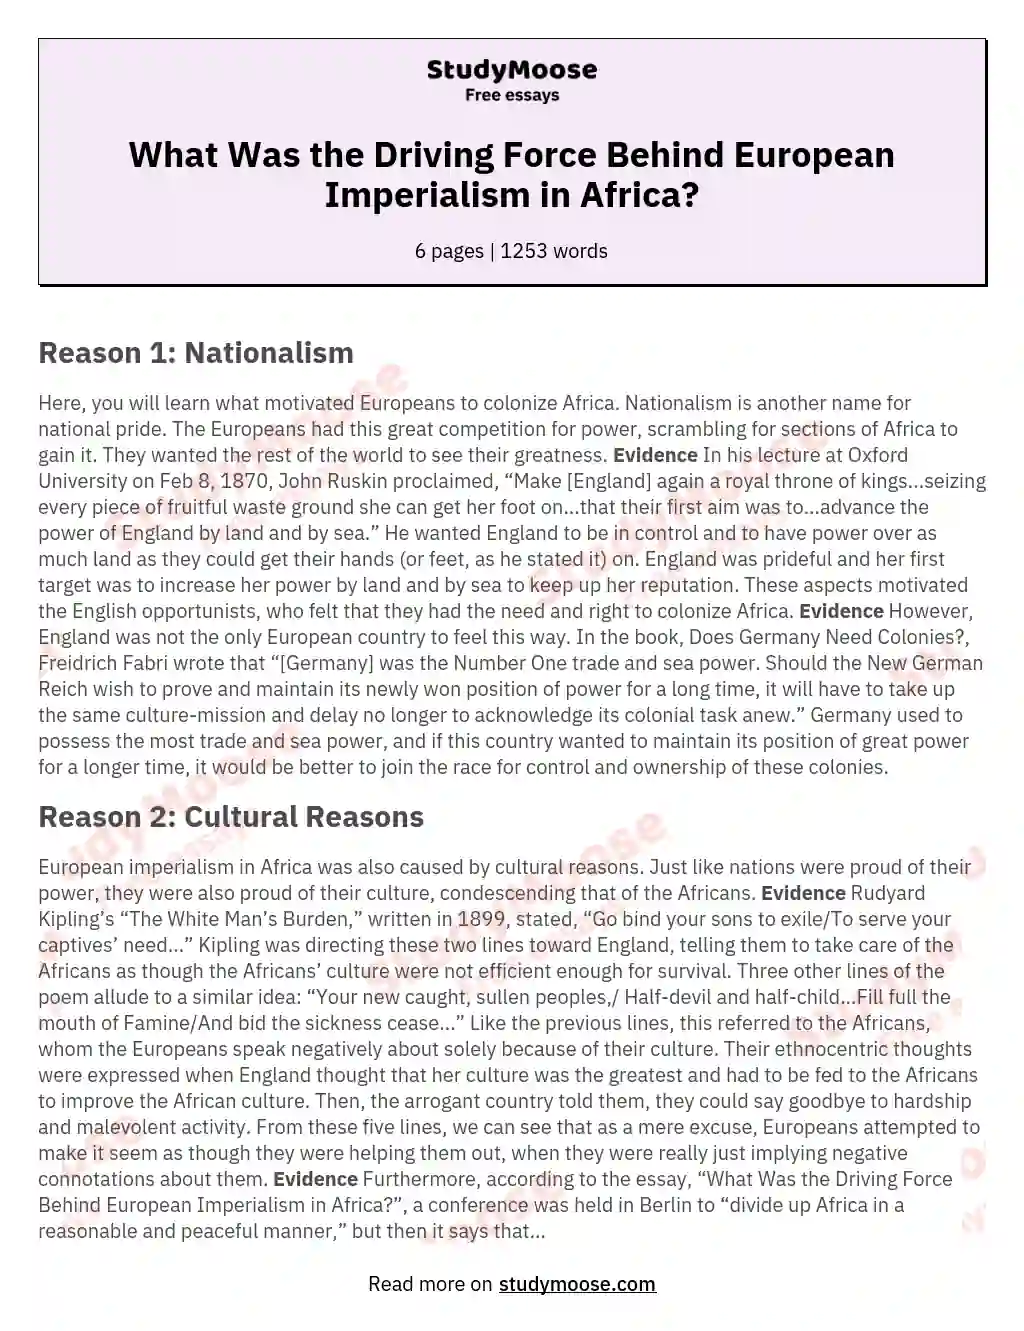 What Was the Driving Force Behind European Imperialism in Africa? essay